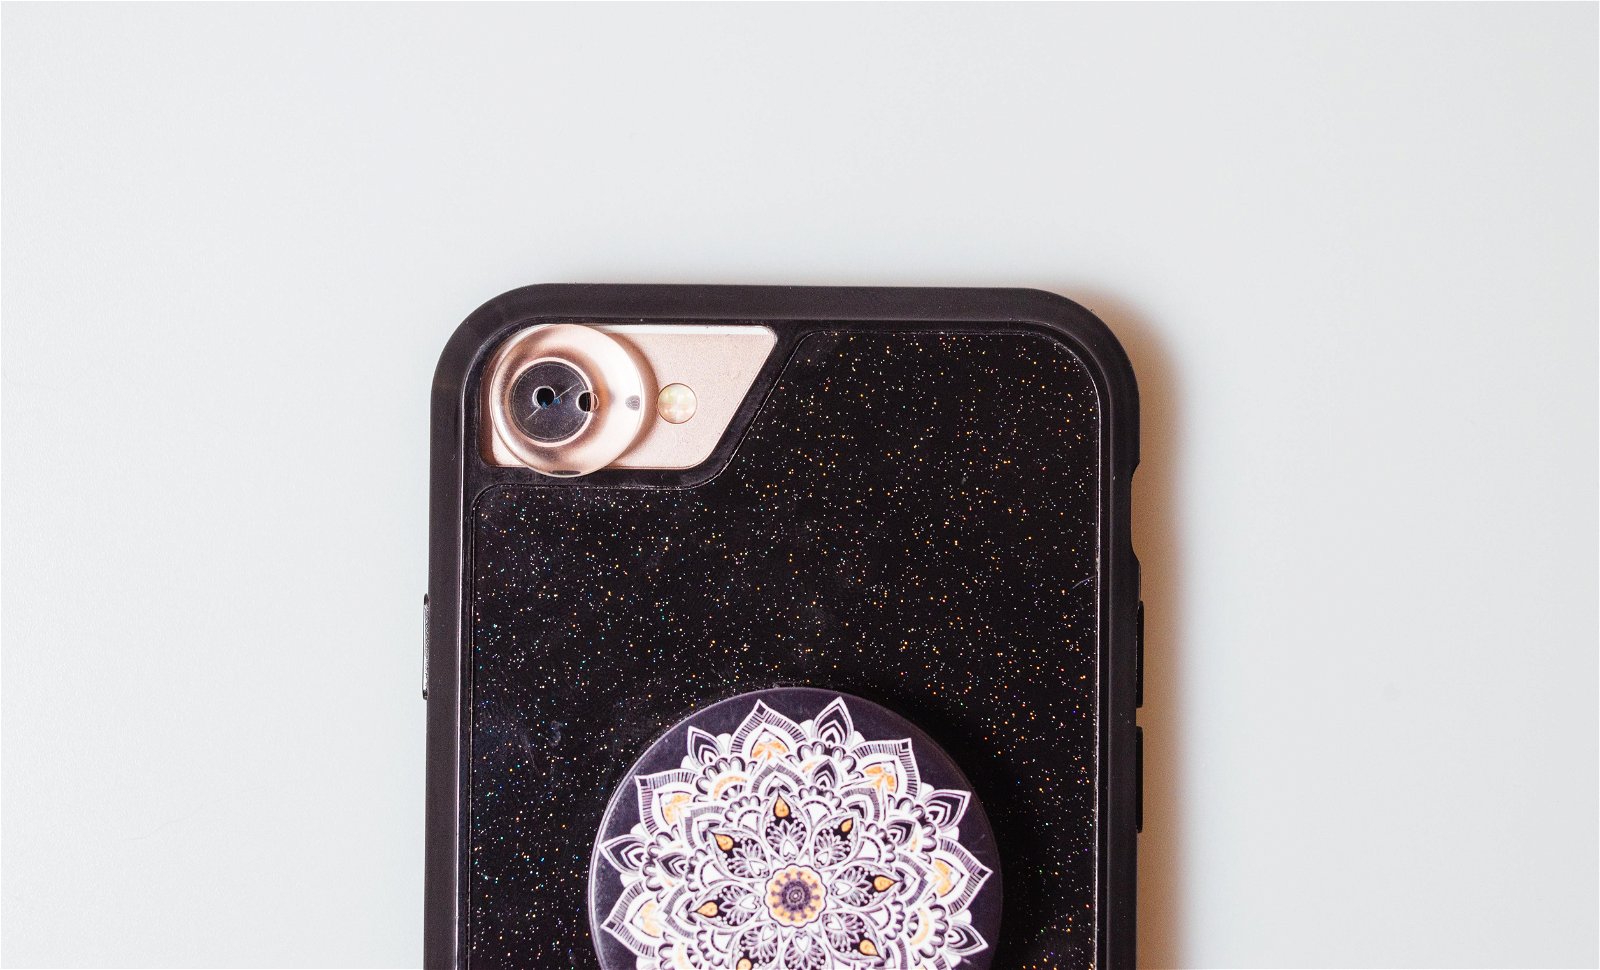 Close-up of a smartphone's camera and black case with a jeweled flowered centrepiece